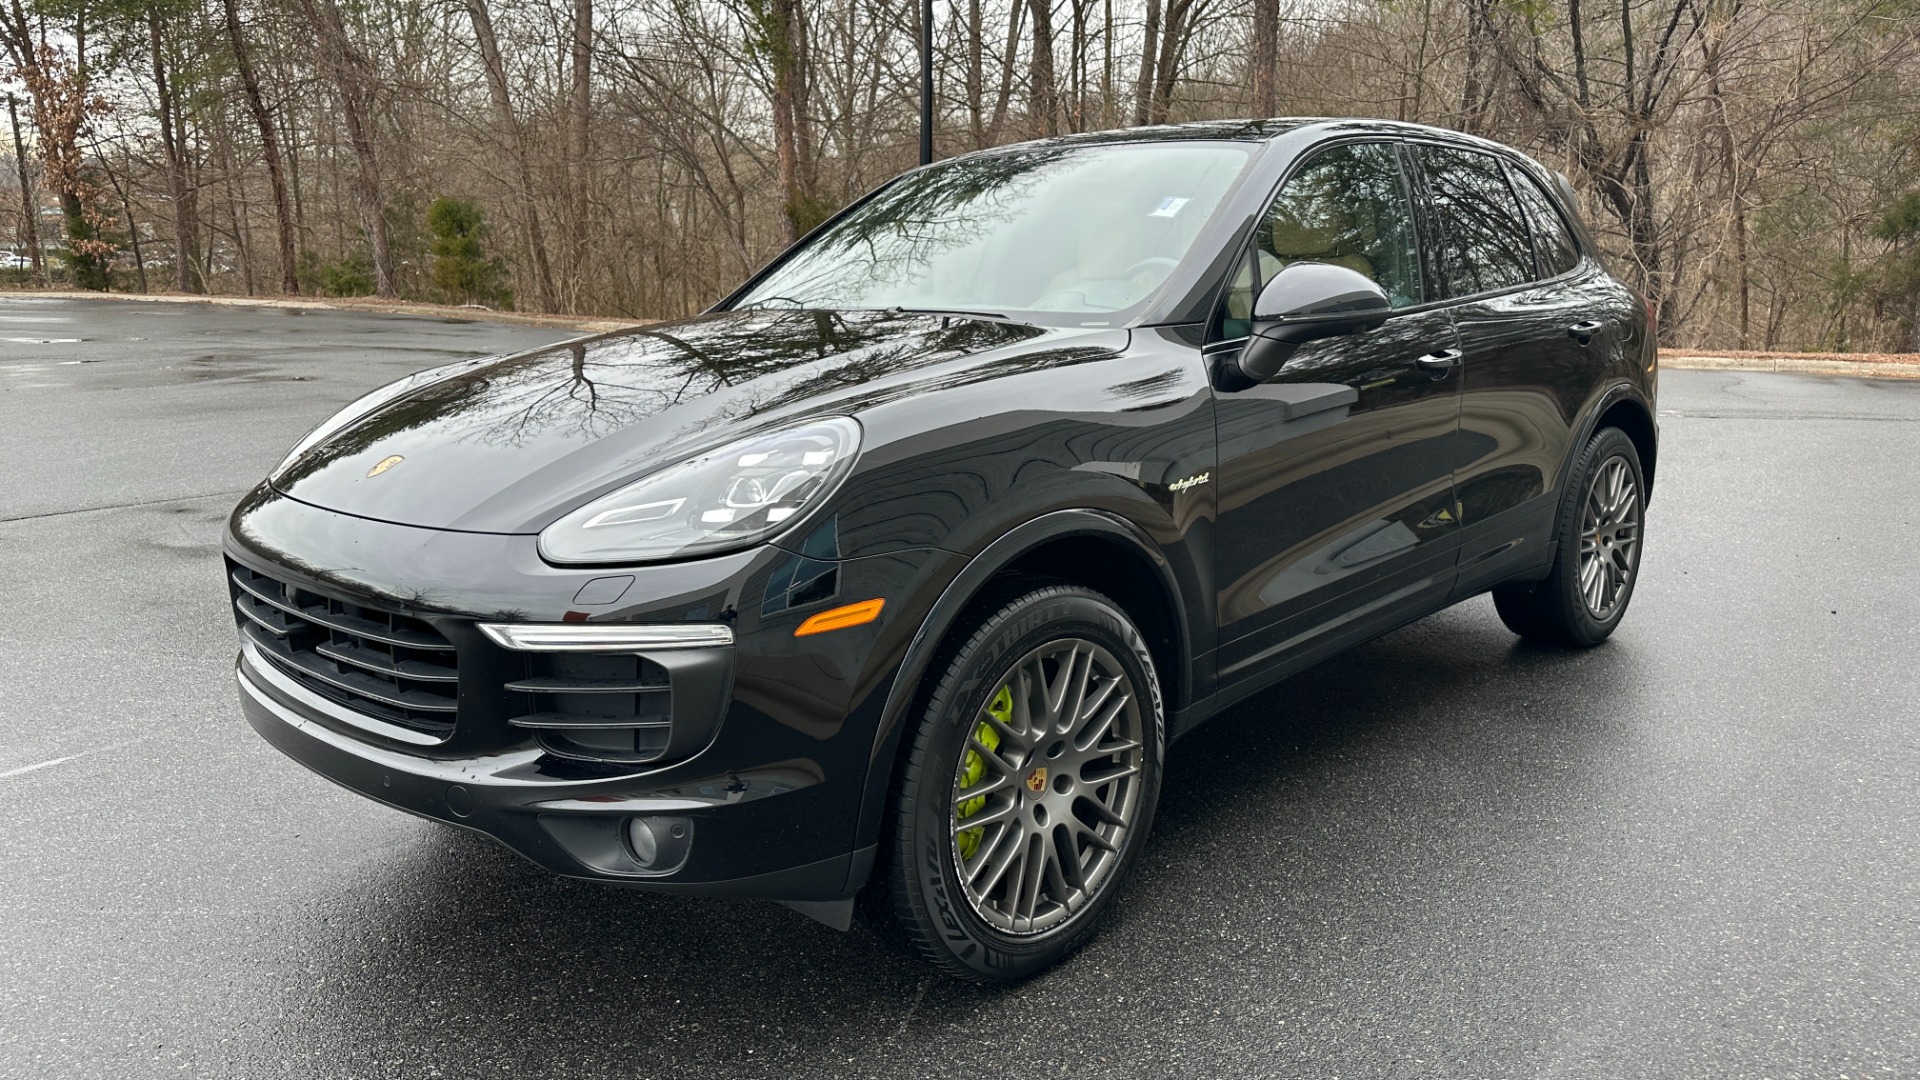 Used 2017 Porsche Cayenne S E-Hybrid PLATINUM / PREMIUM PLUS / SAFETY ASSIST for sale Sold at Formula Imports in Charlotte NC 28227 5